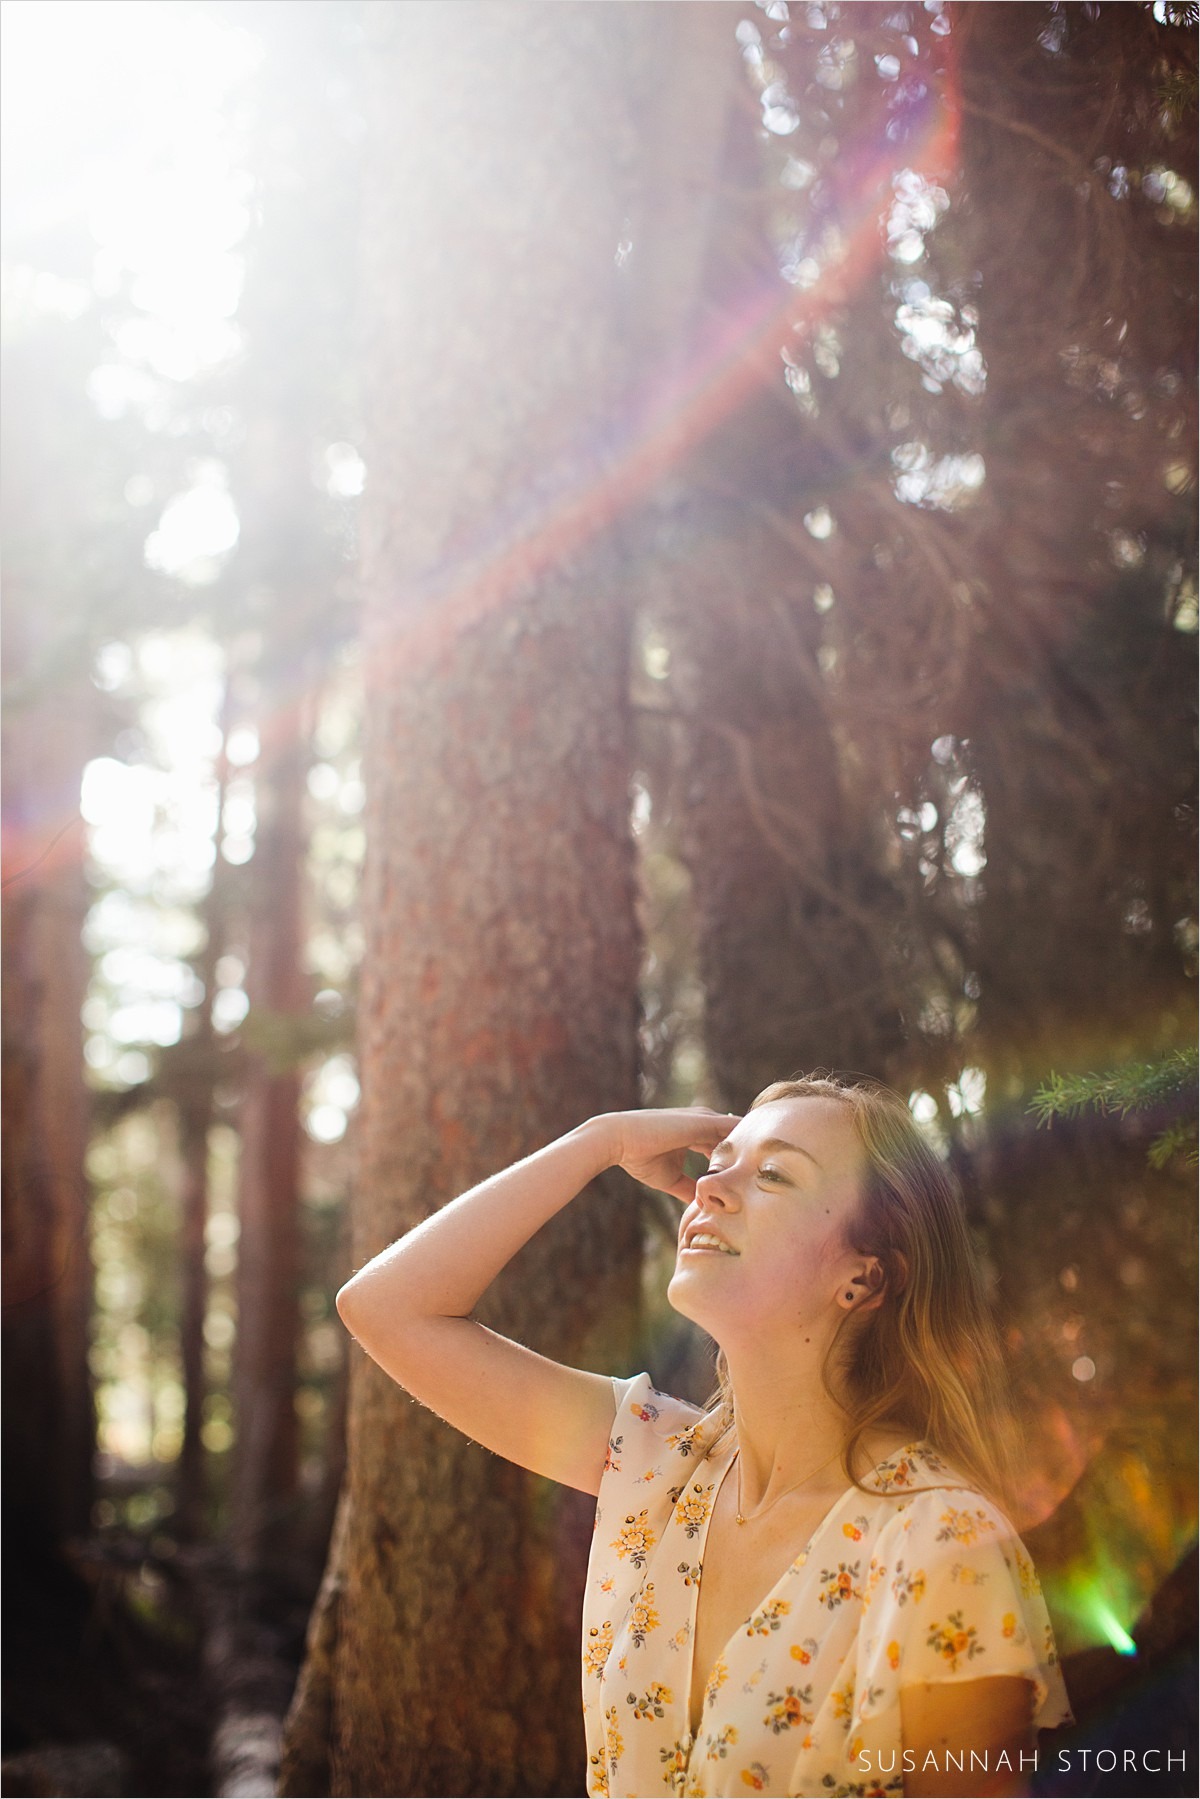 a woman looks up while combing back her hair in a forest